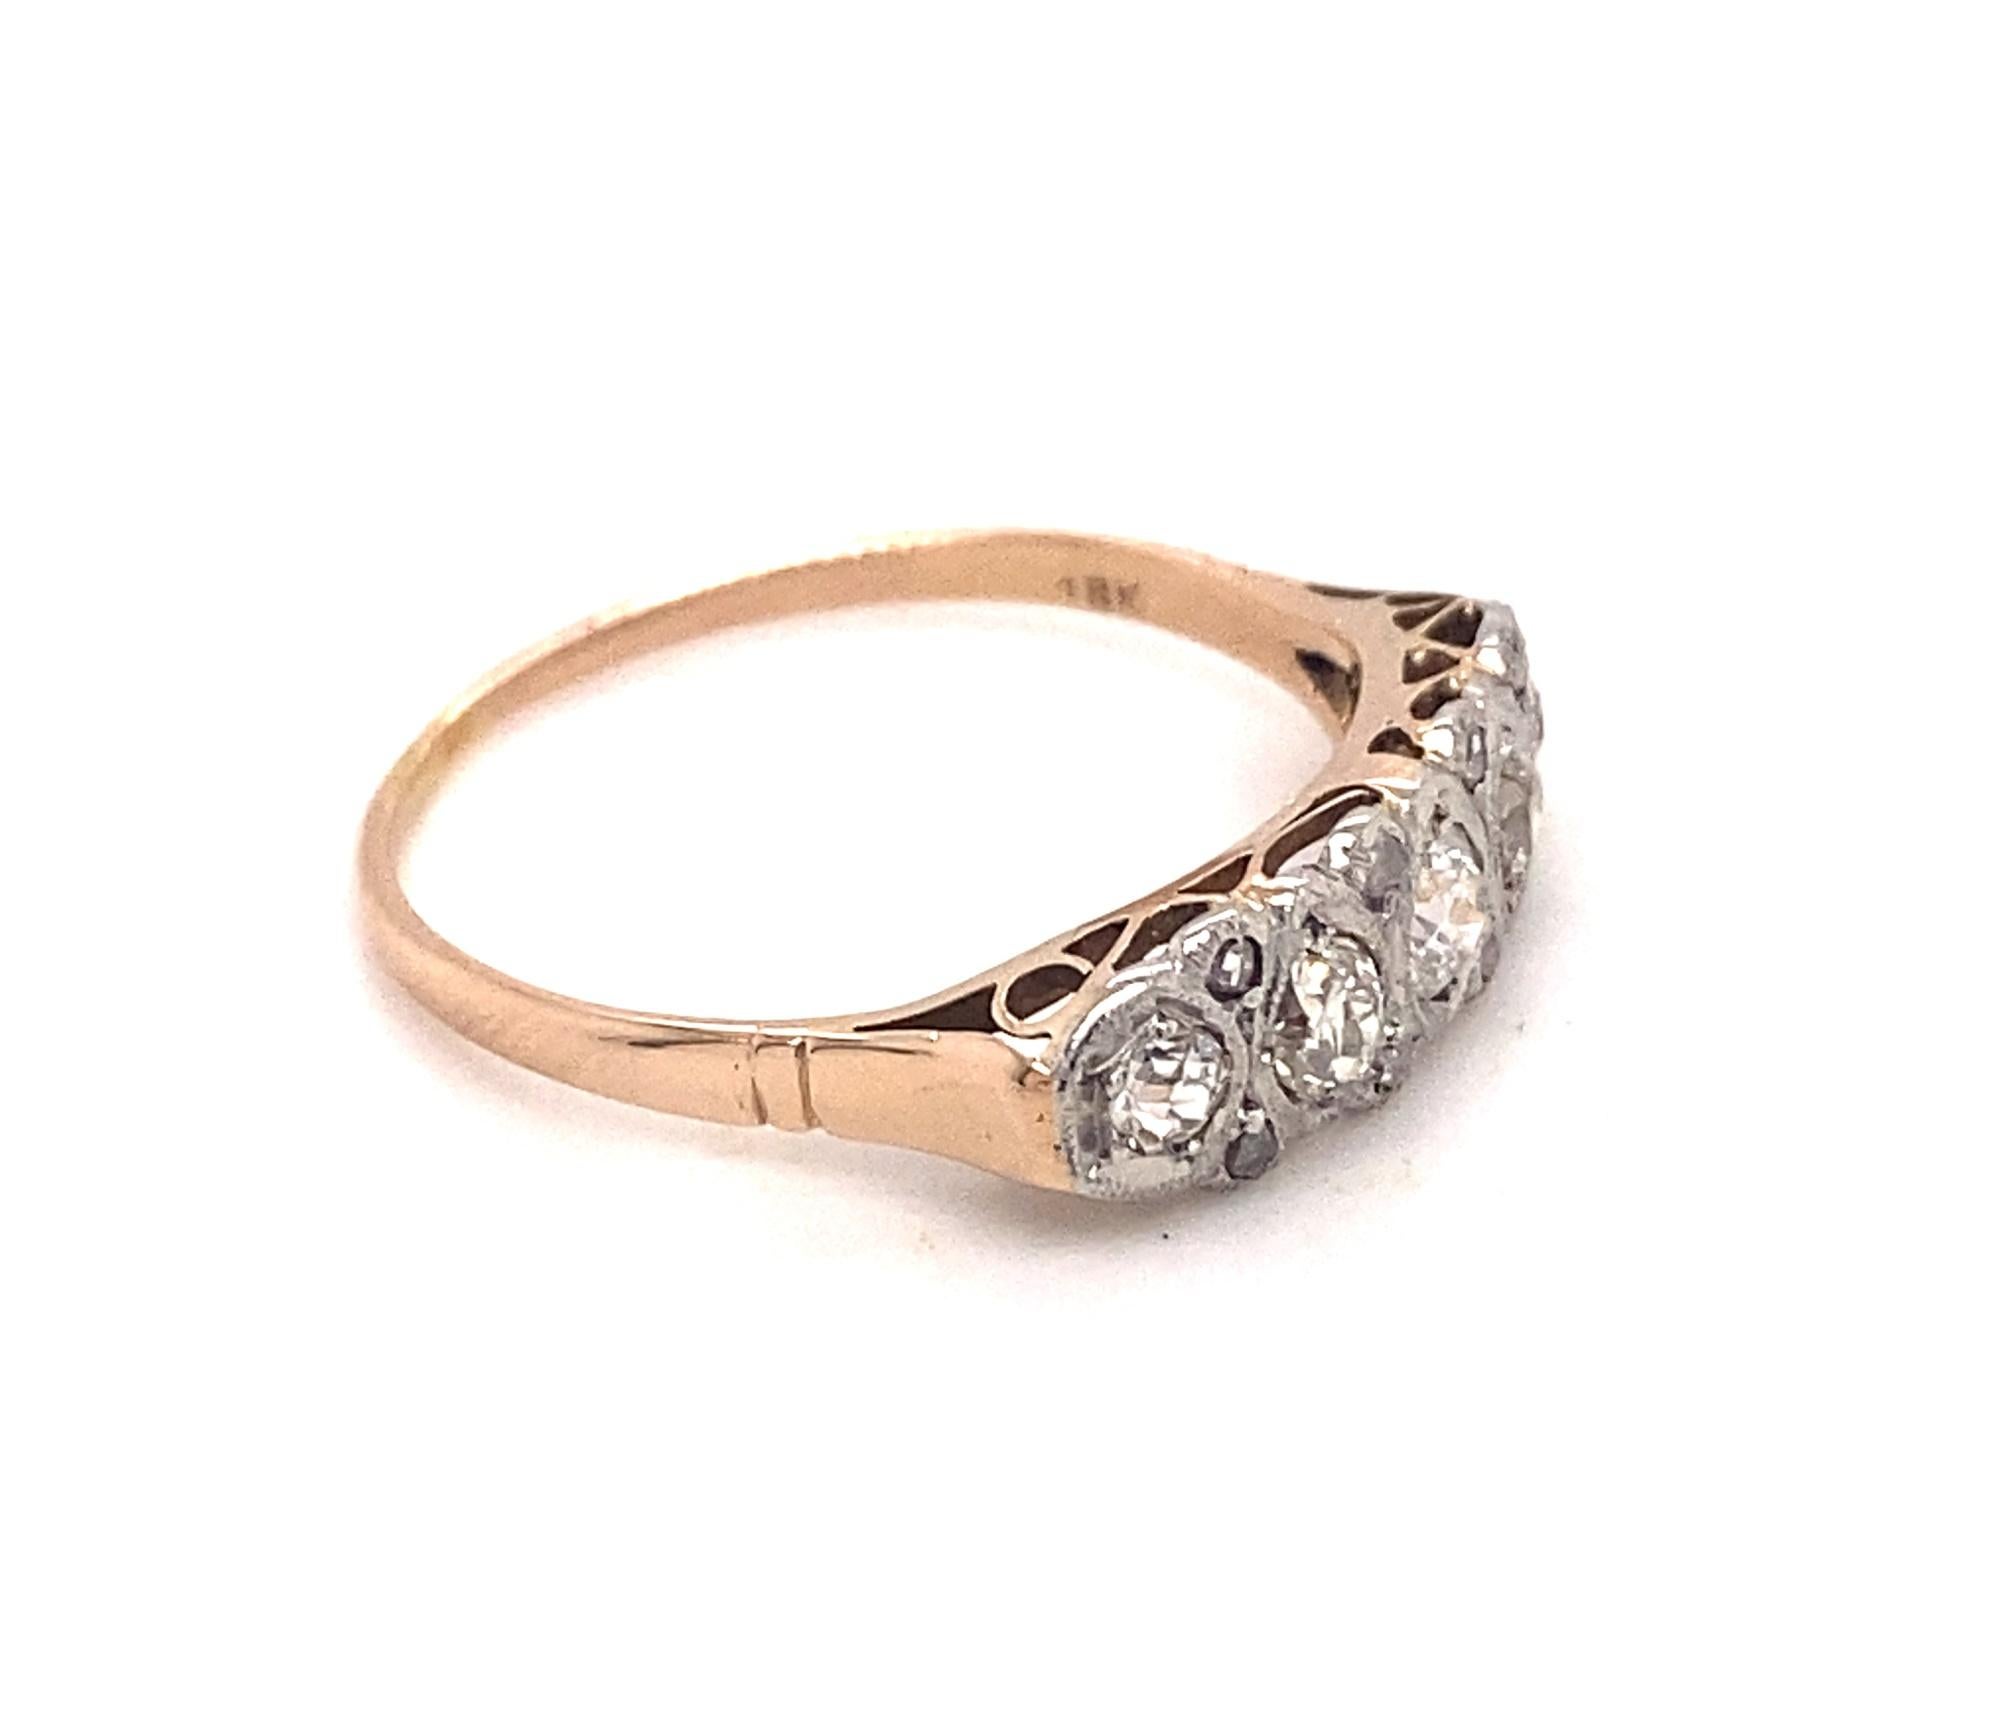 Original Art Deco 13 Diamonds Platinum 18K Yellow Gold Ring. This is a beautiful original art deco ring set with 5 old mine cuts and 8 rose cuts in platinum with a marked 18k yellow gold ring shank c.1930. The five diamonds are white sparkly old